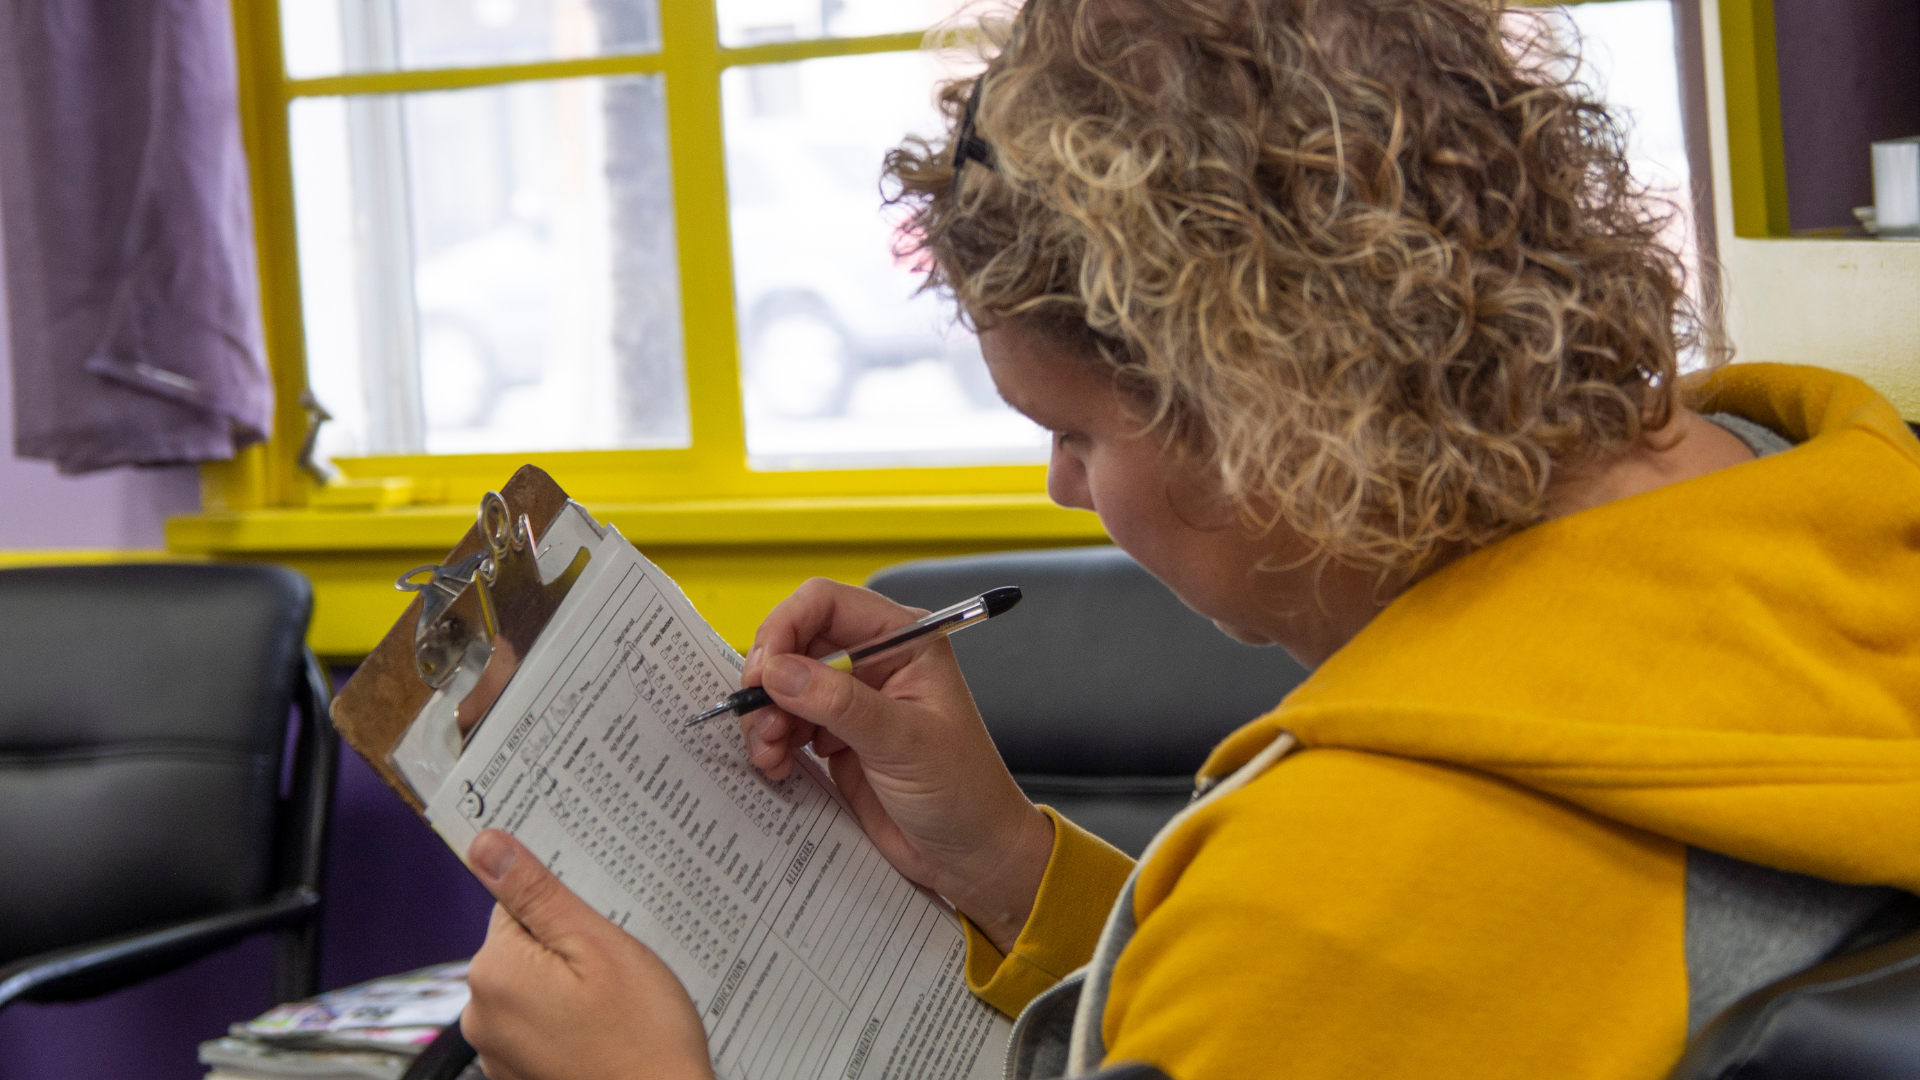 A woman with curly hair filling out a form on a clipboard